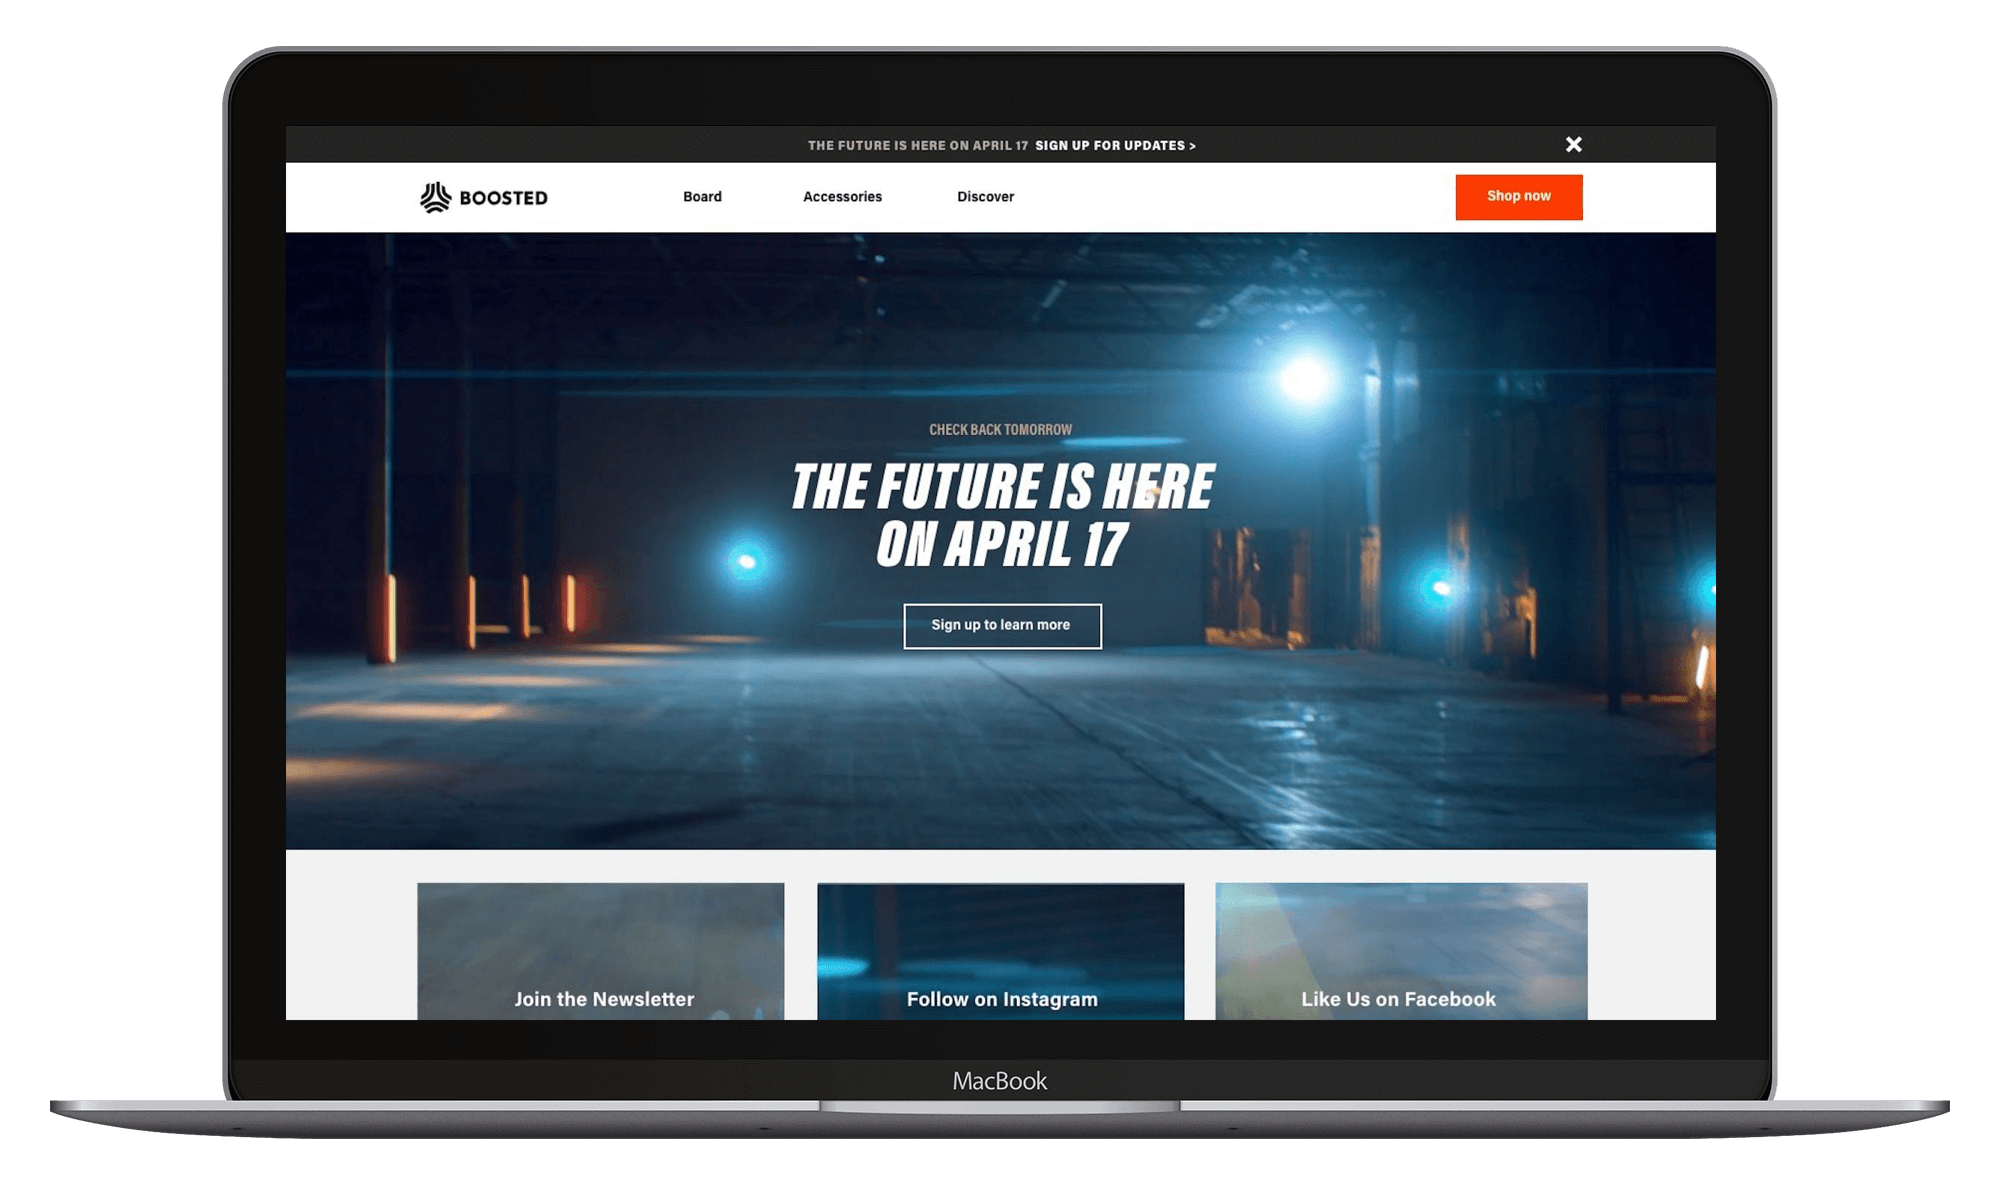 The future is here - teaser website